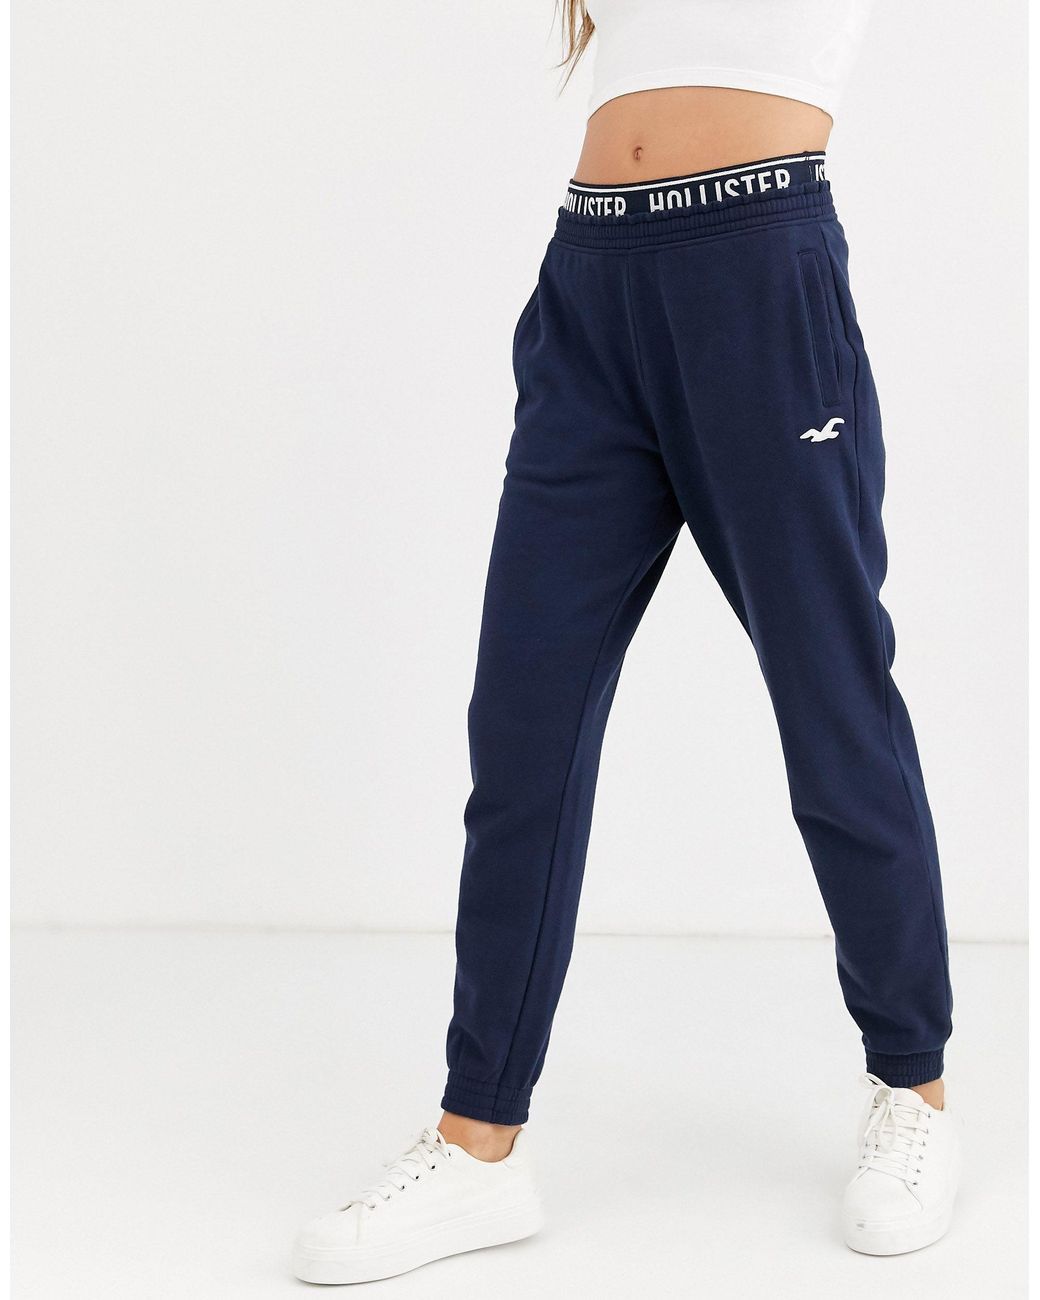 Hollister large iconic logo cuffed jogger in navy, ASOS